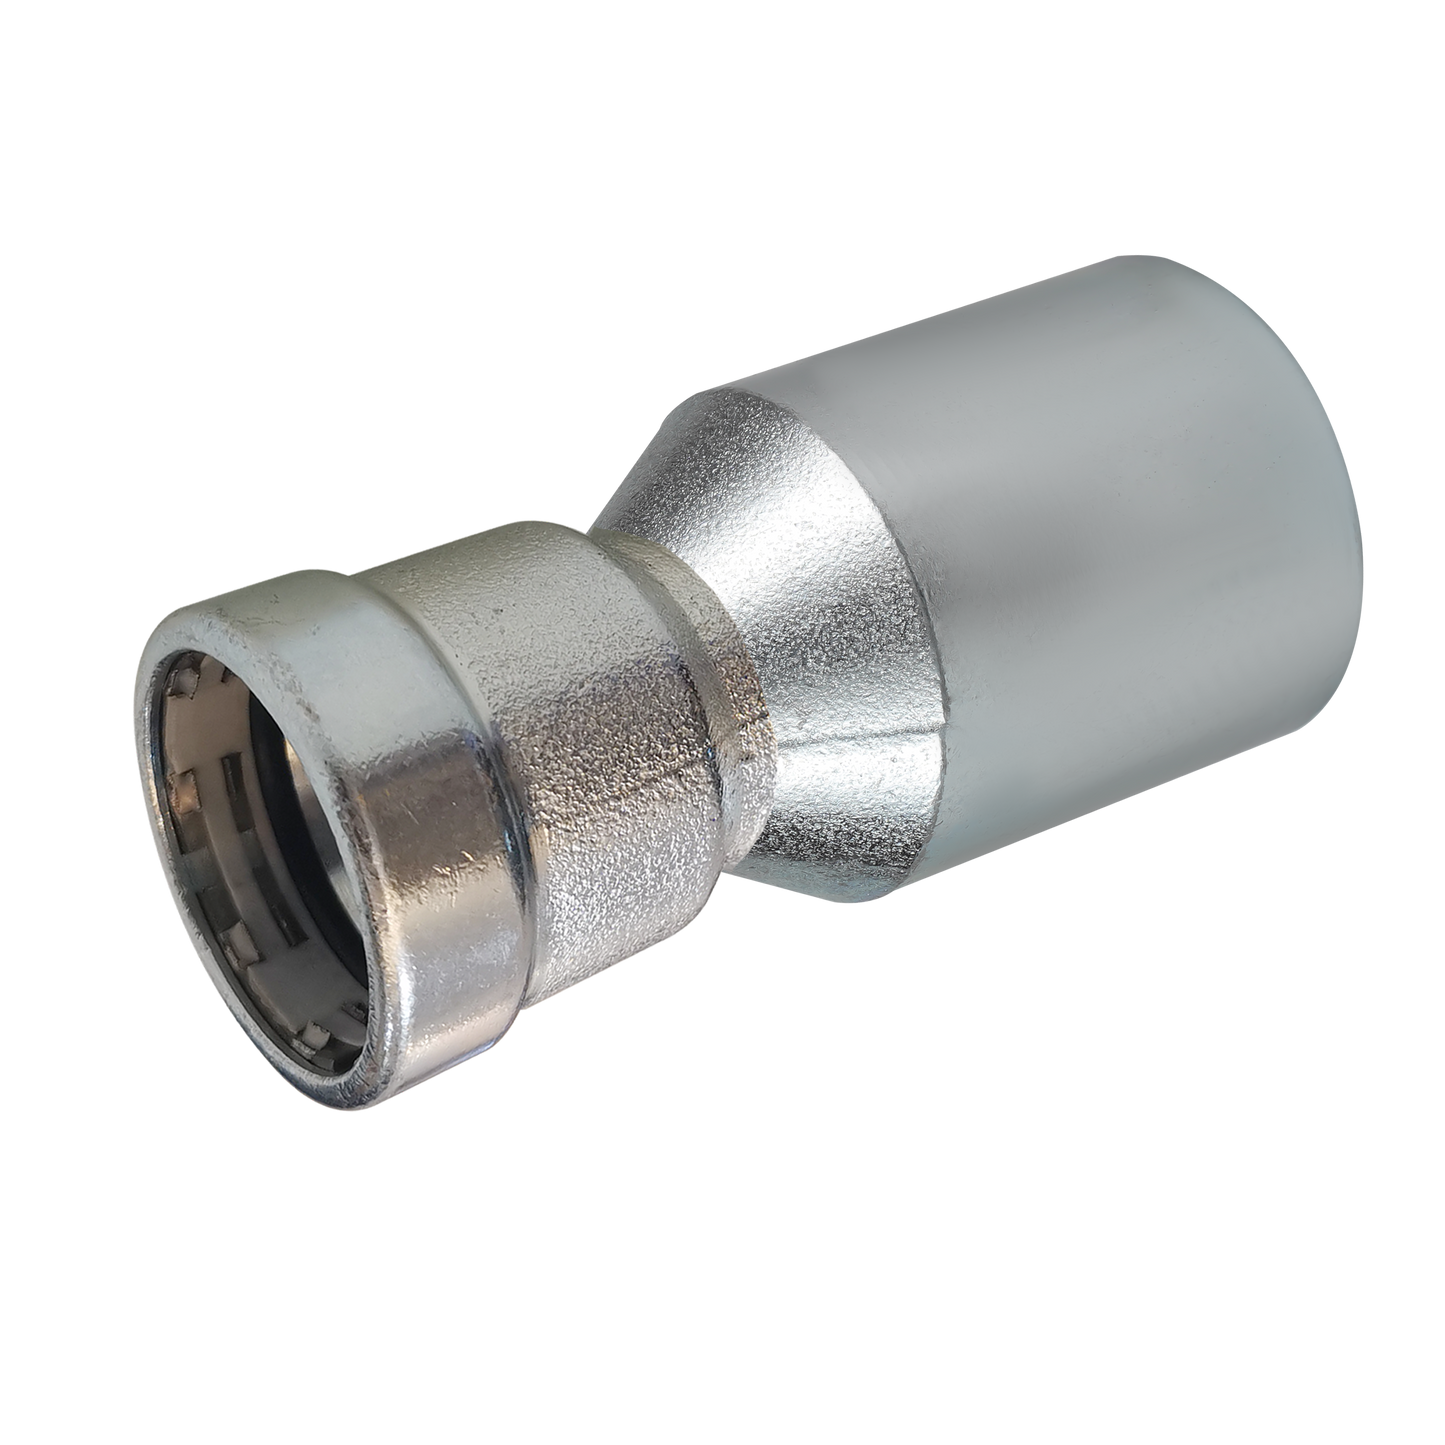 LC-Press Carbon steel Press fittings for thick-wall steel pipe, Reducer with Plain End, 2x1-1/2 inch FTGxP